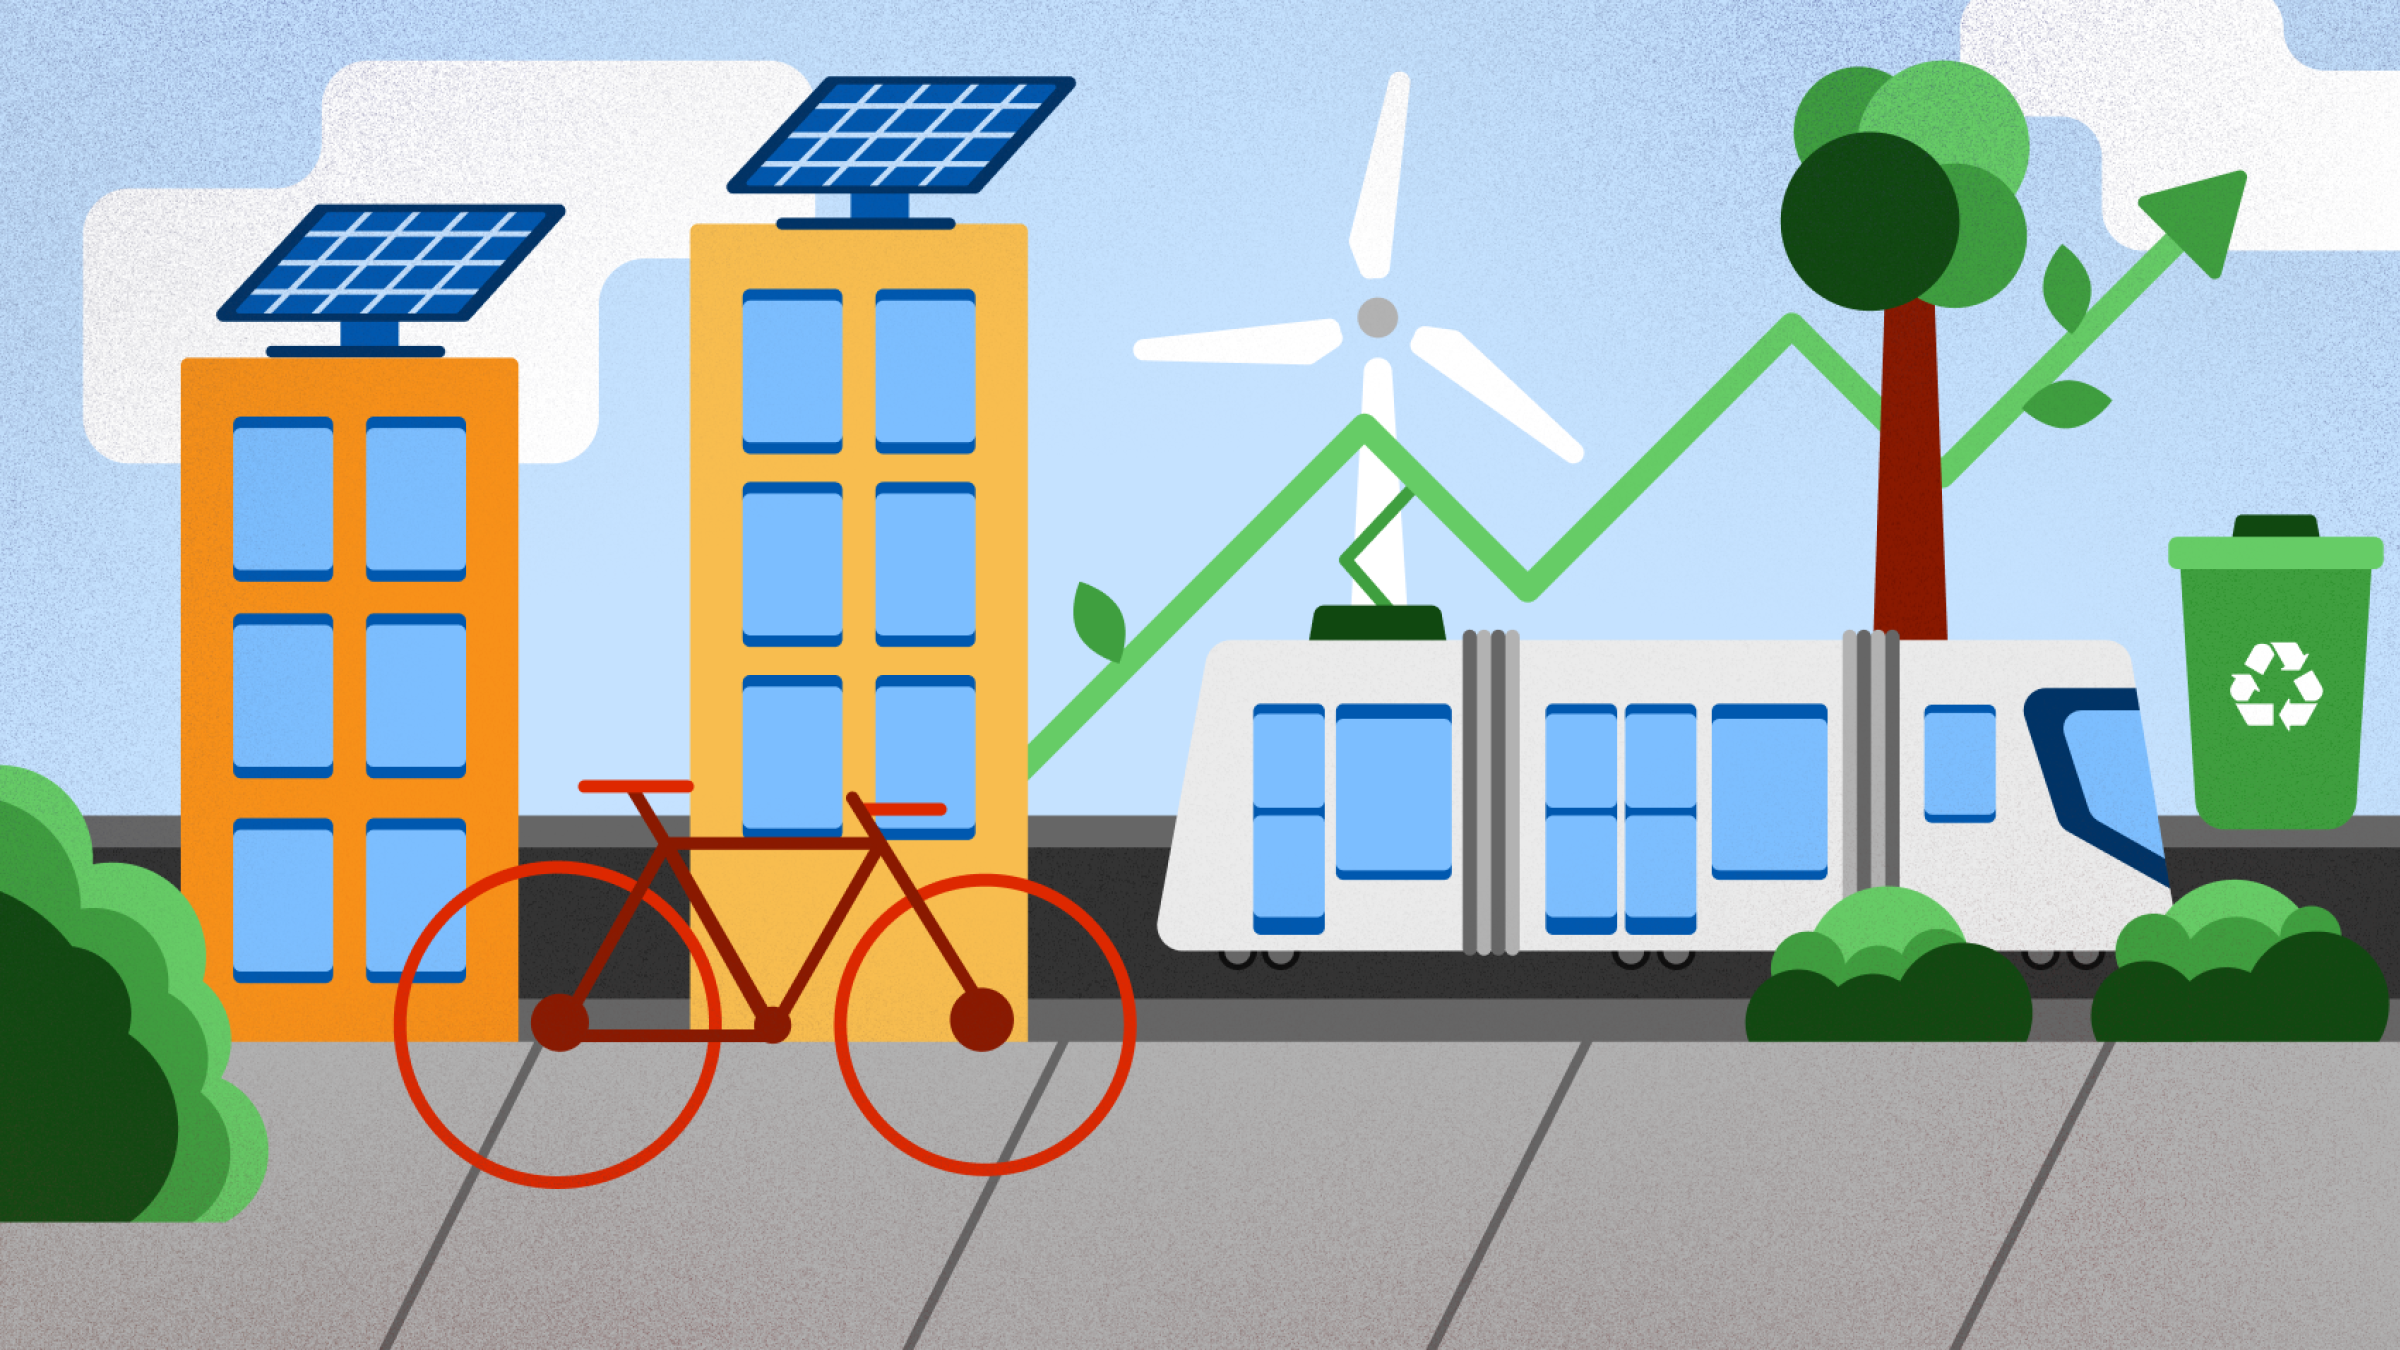 green energy display of buildings with solar panels, a bicycle, a train, a windmill, and recycling bin